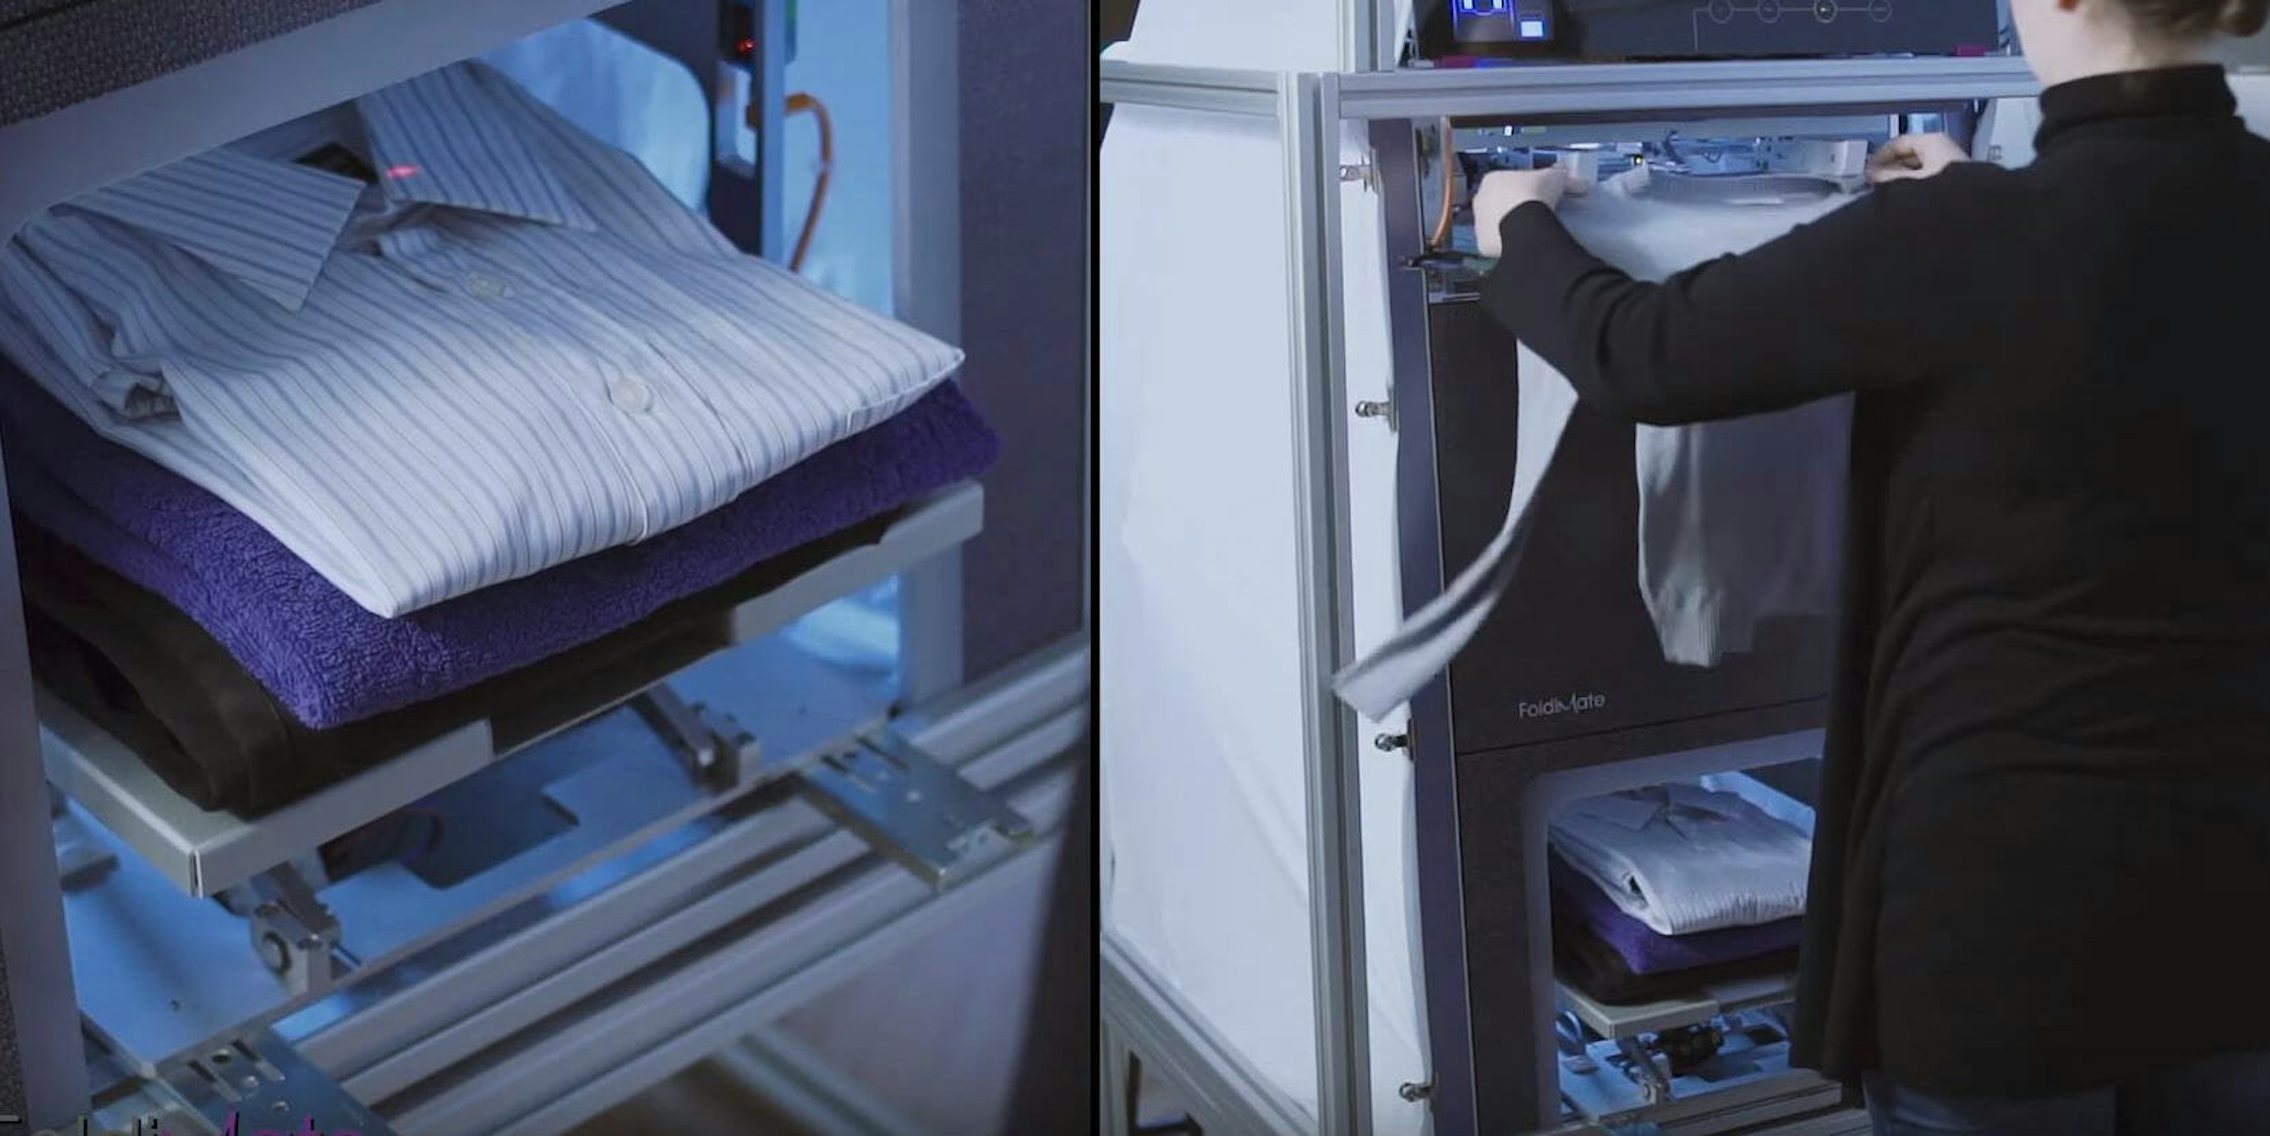 CES 2018: Our Hands-On Demo of the $980 Laundry Folding Robot